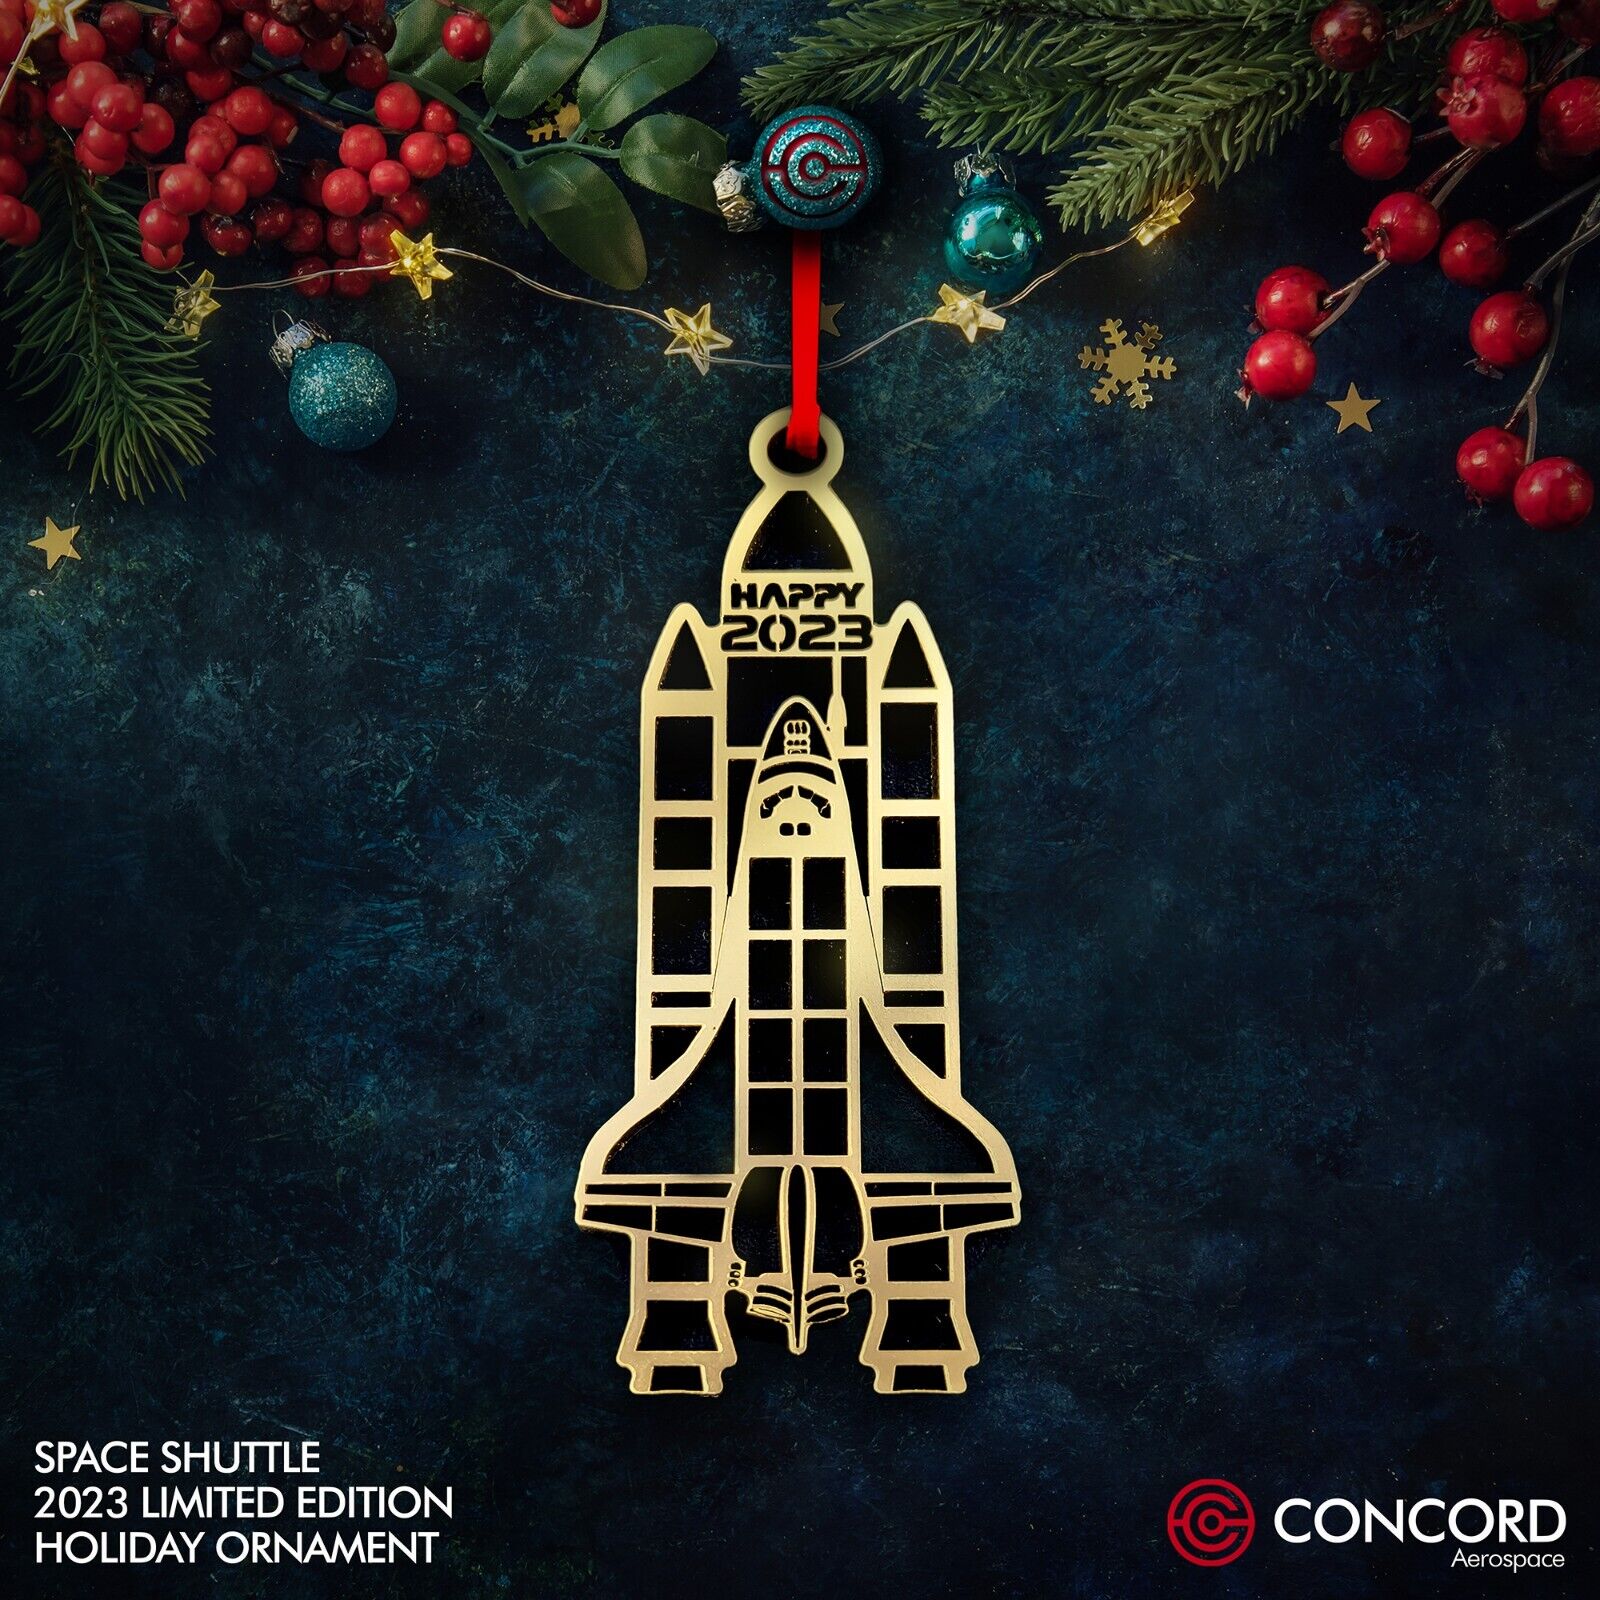 SPACE SHUTTLE 2023 LIMITED EDITION TREE ORNAMENT